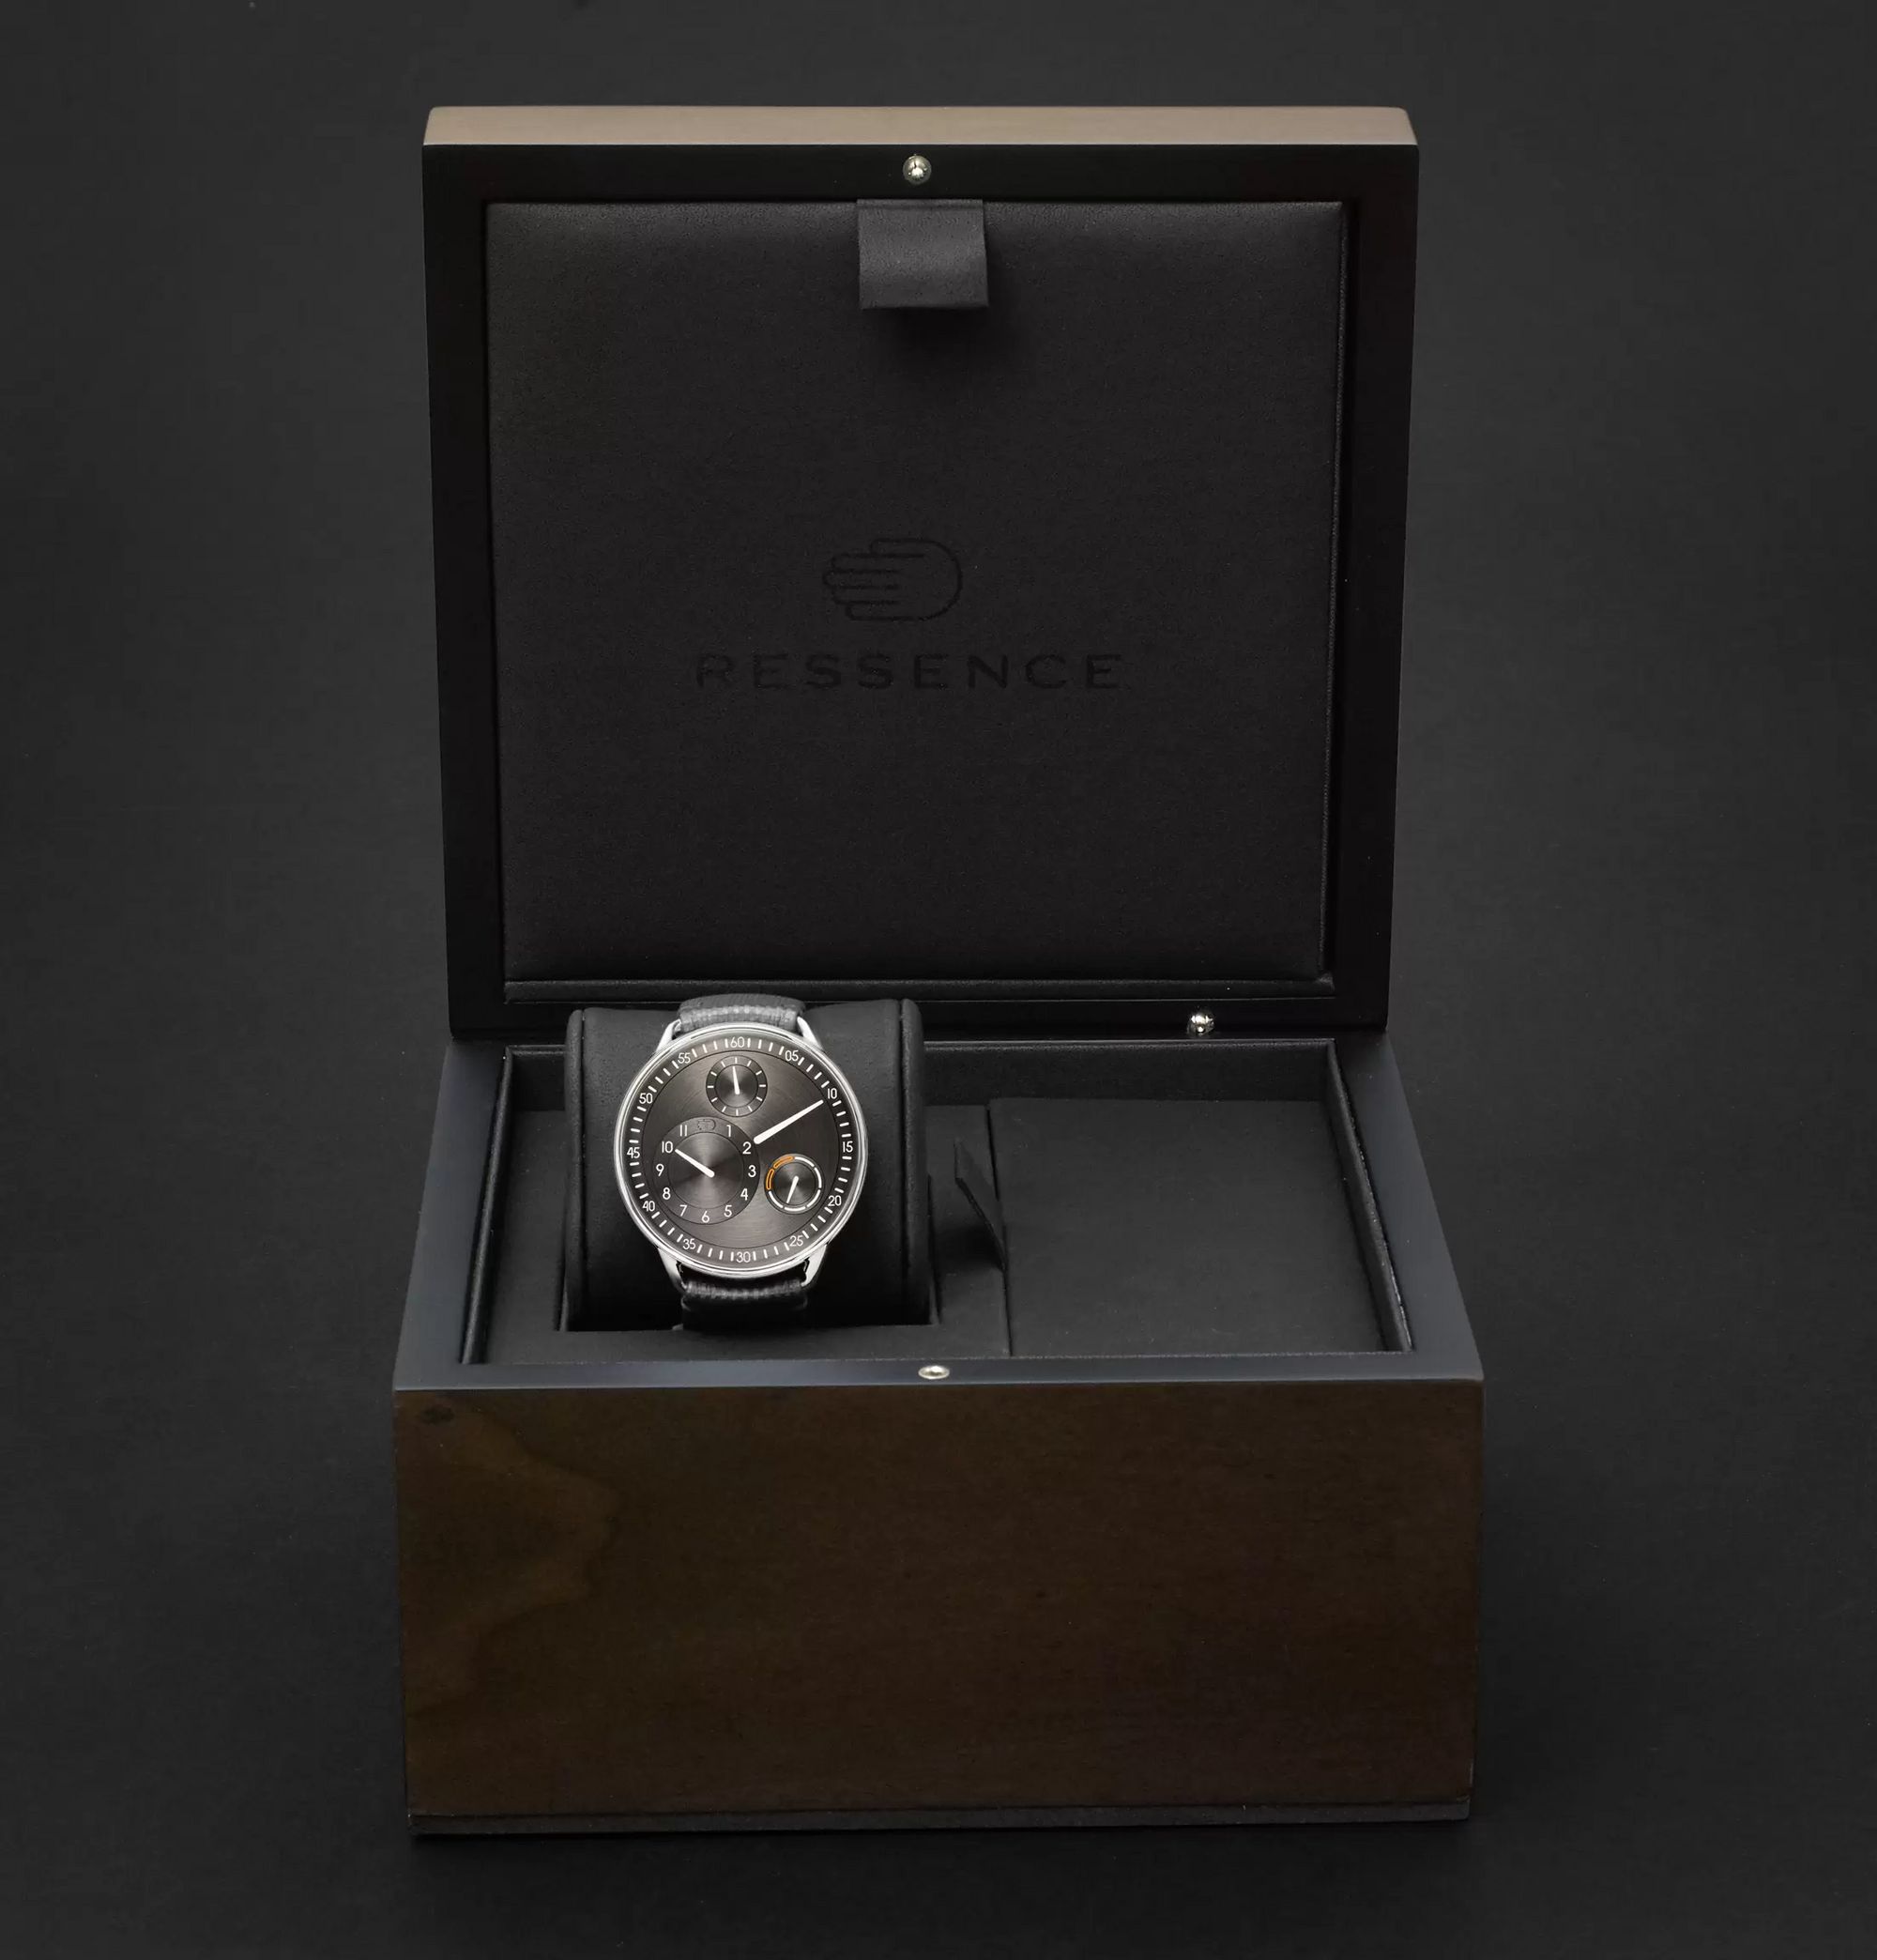 RESSENCE Type 1 Mechanical 42mm Titanium and Leather Watch, Ref. No. TYPE 1R